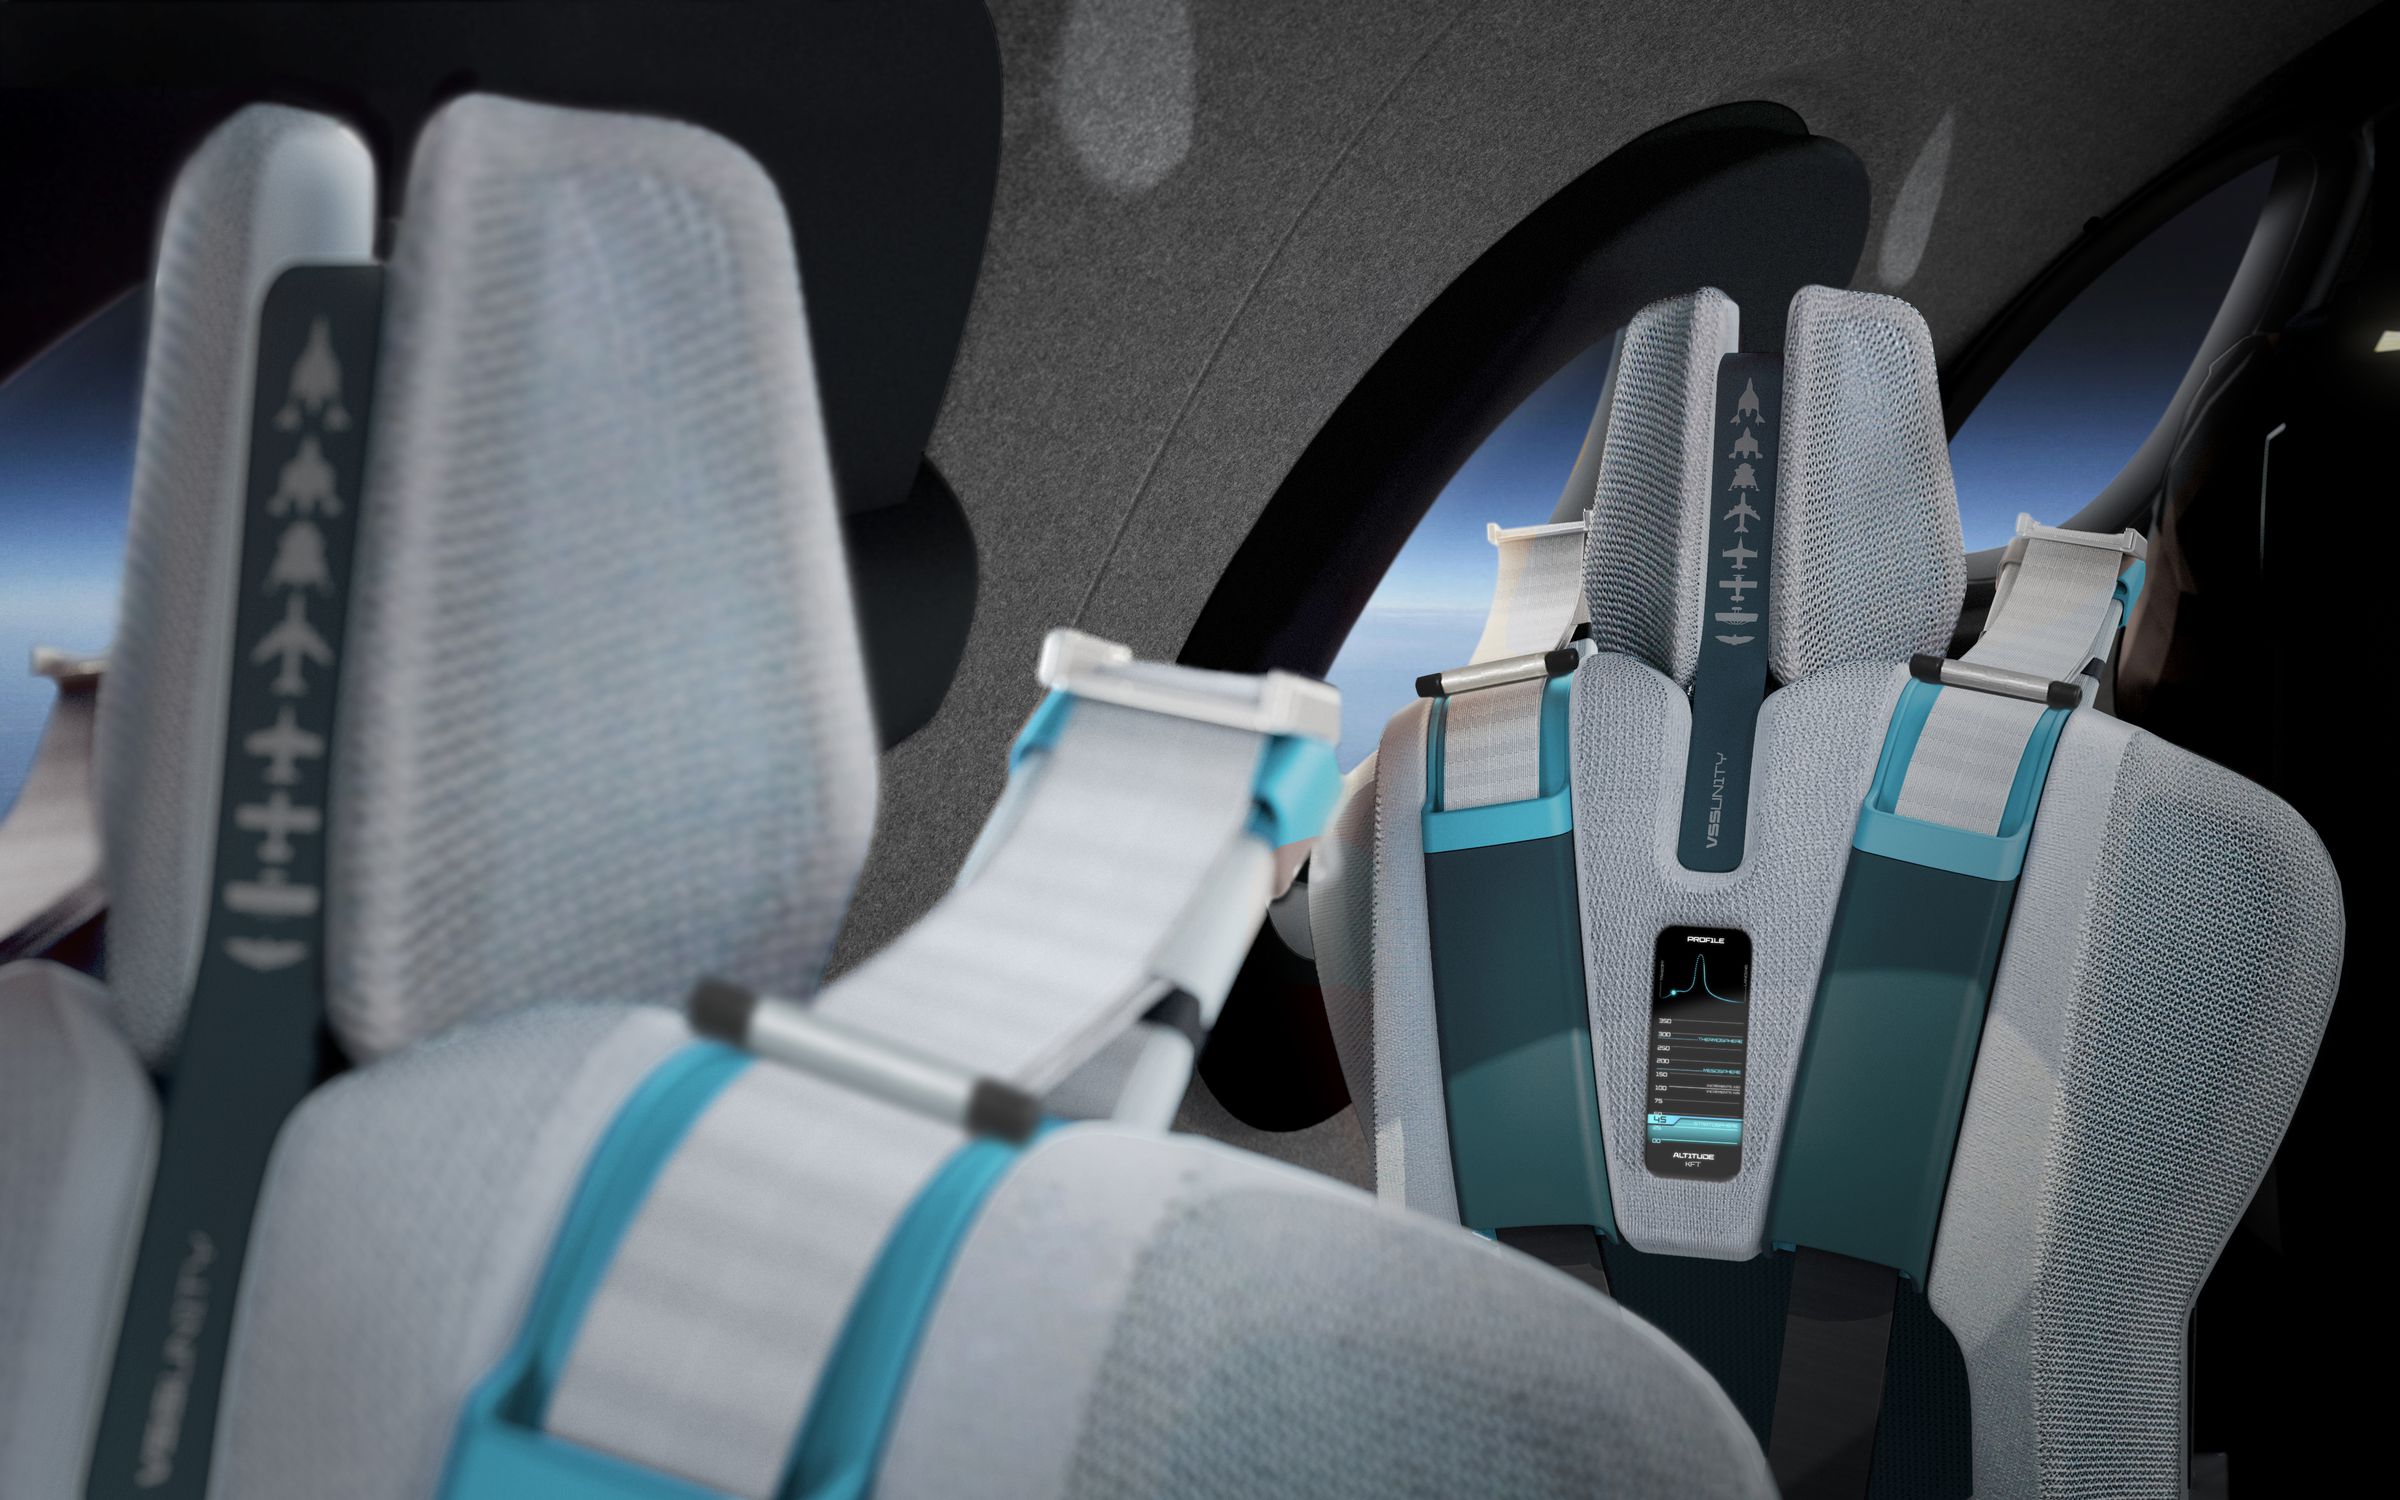 A rendering of the back-of-seat details in the cabin